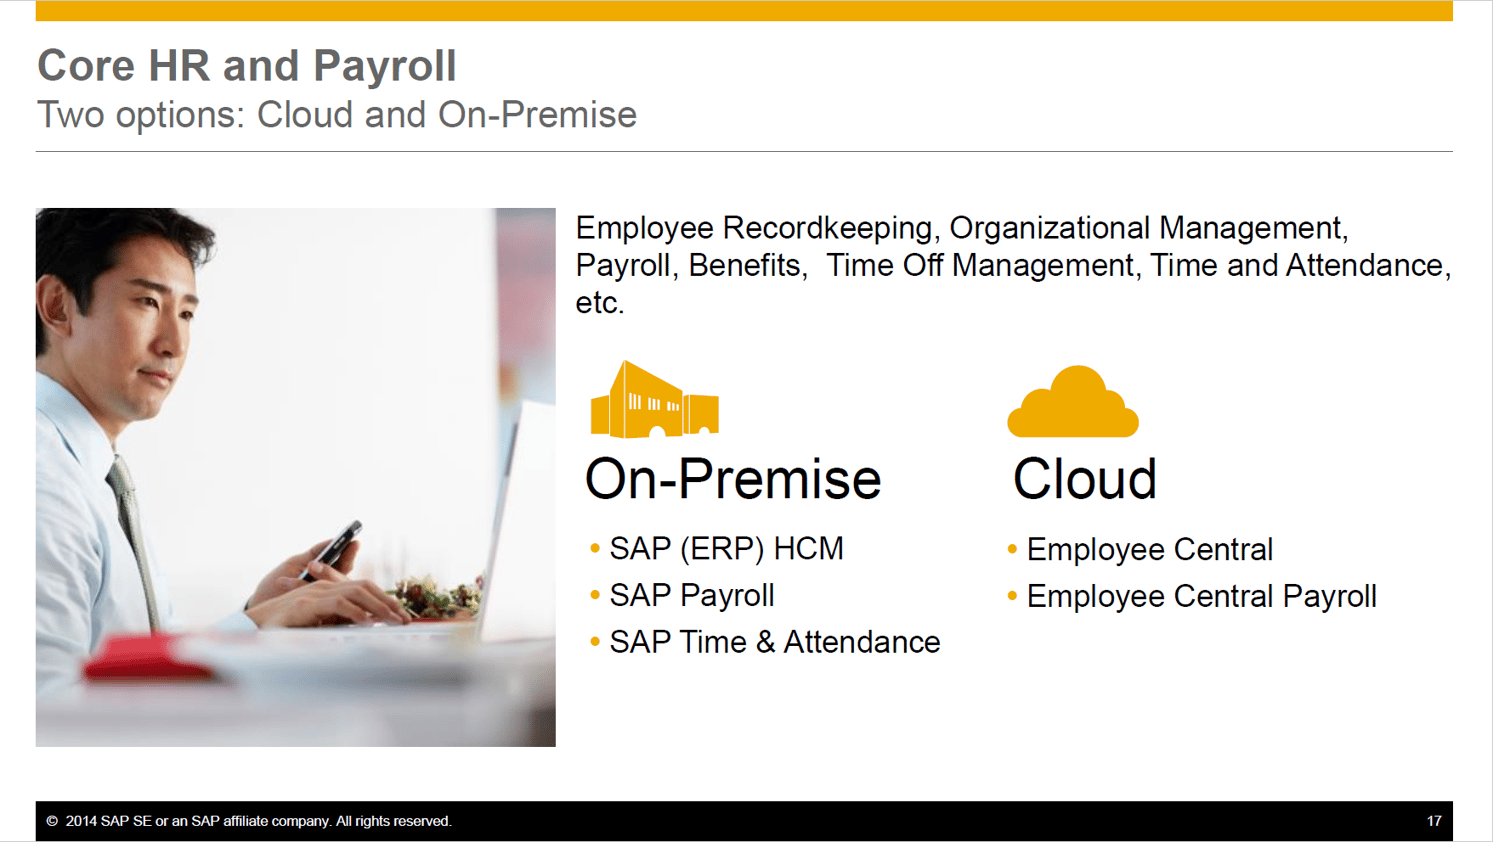 AP HCM customers a planned movement to the cloud and a planned future cessation of its On-Premise HCM applications, including Payroll